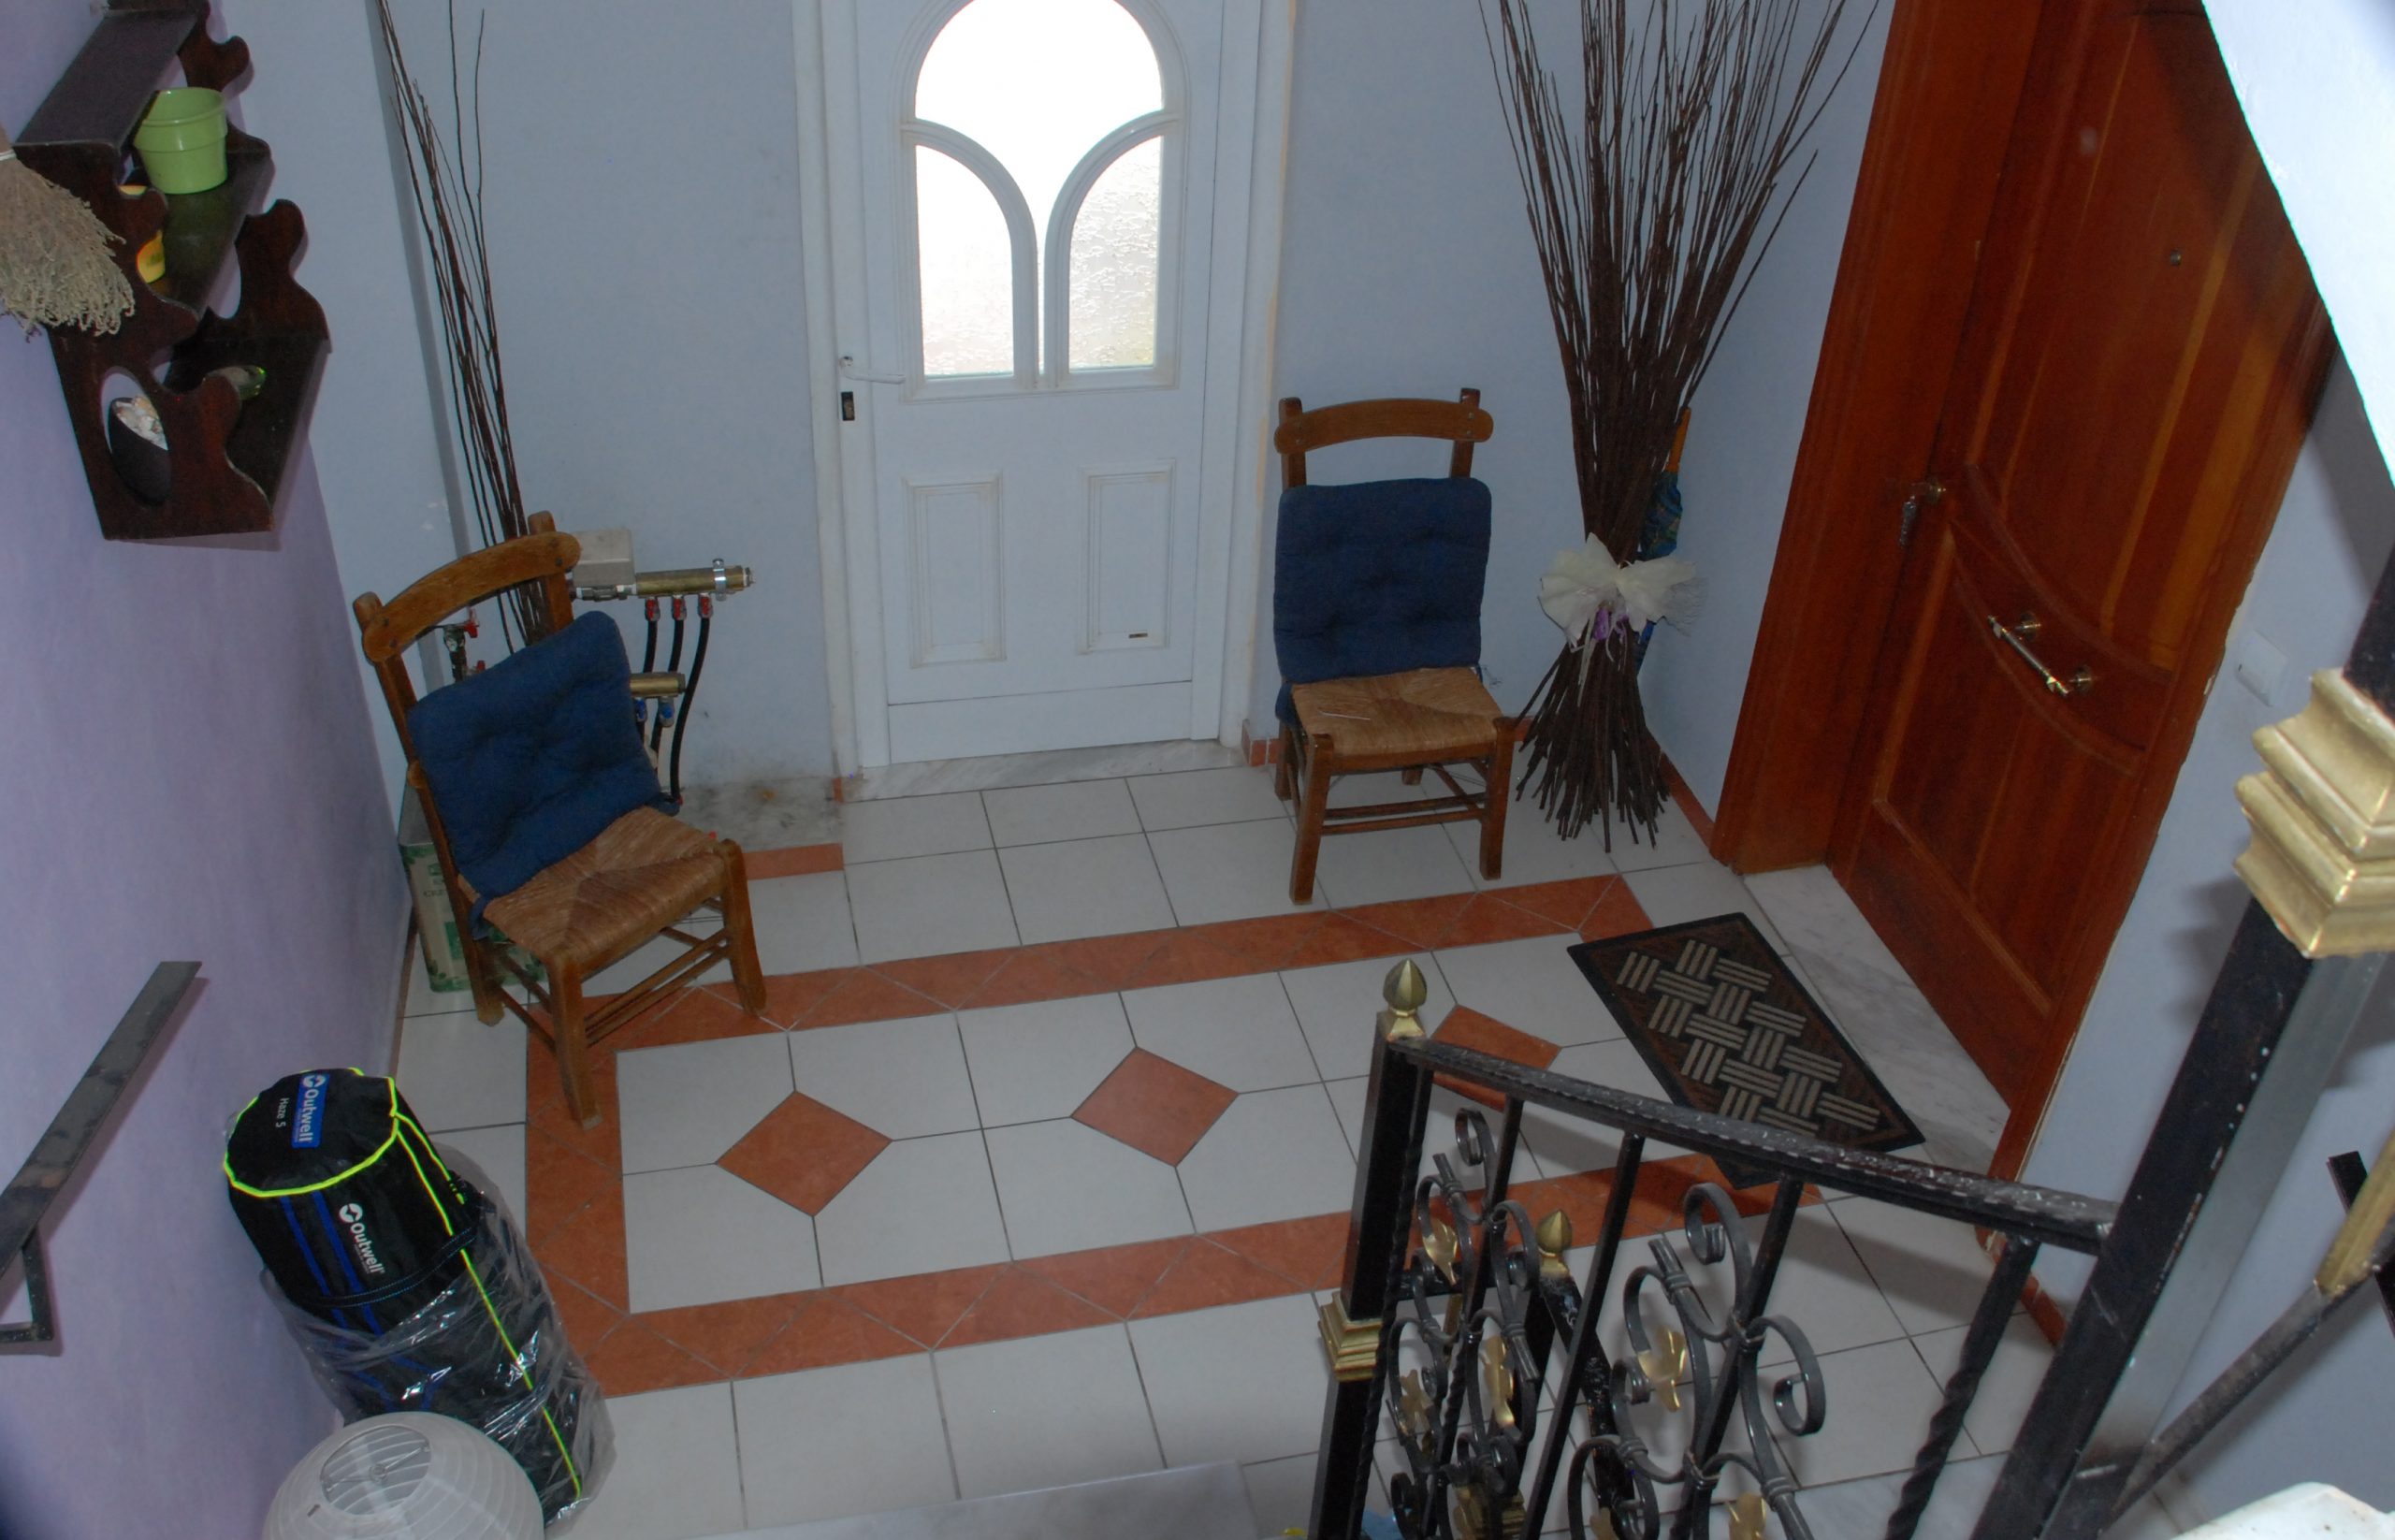 Entrance to house for sale in Patra Greece, Patra